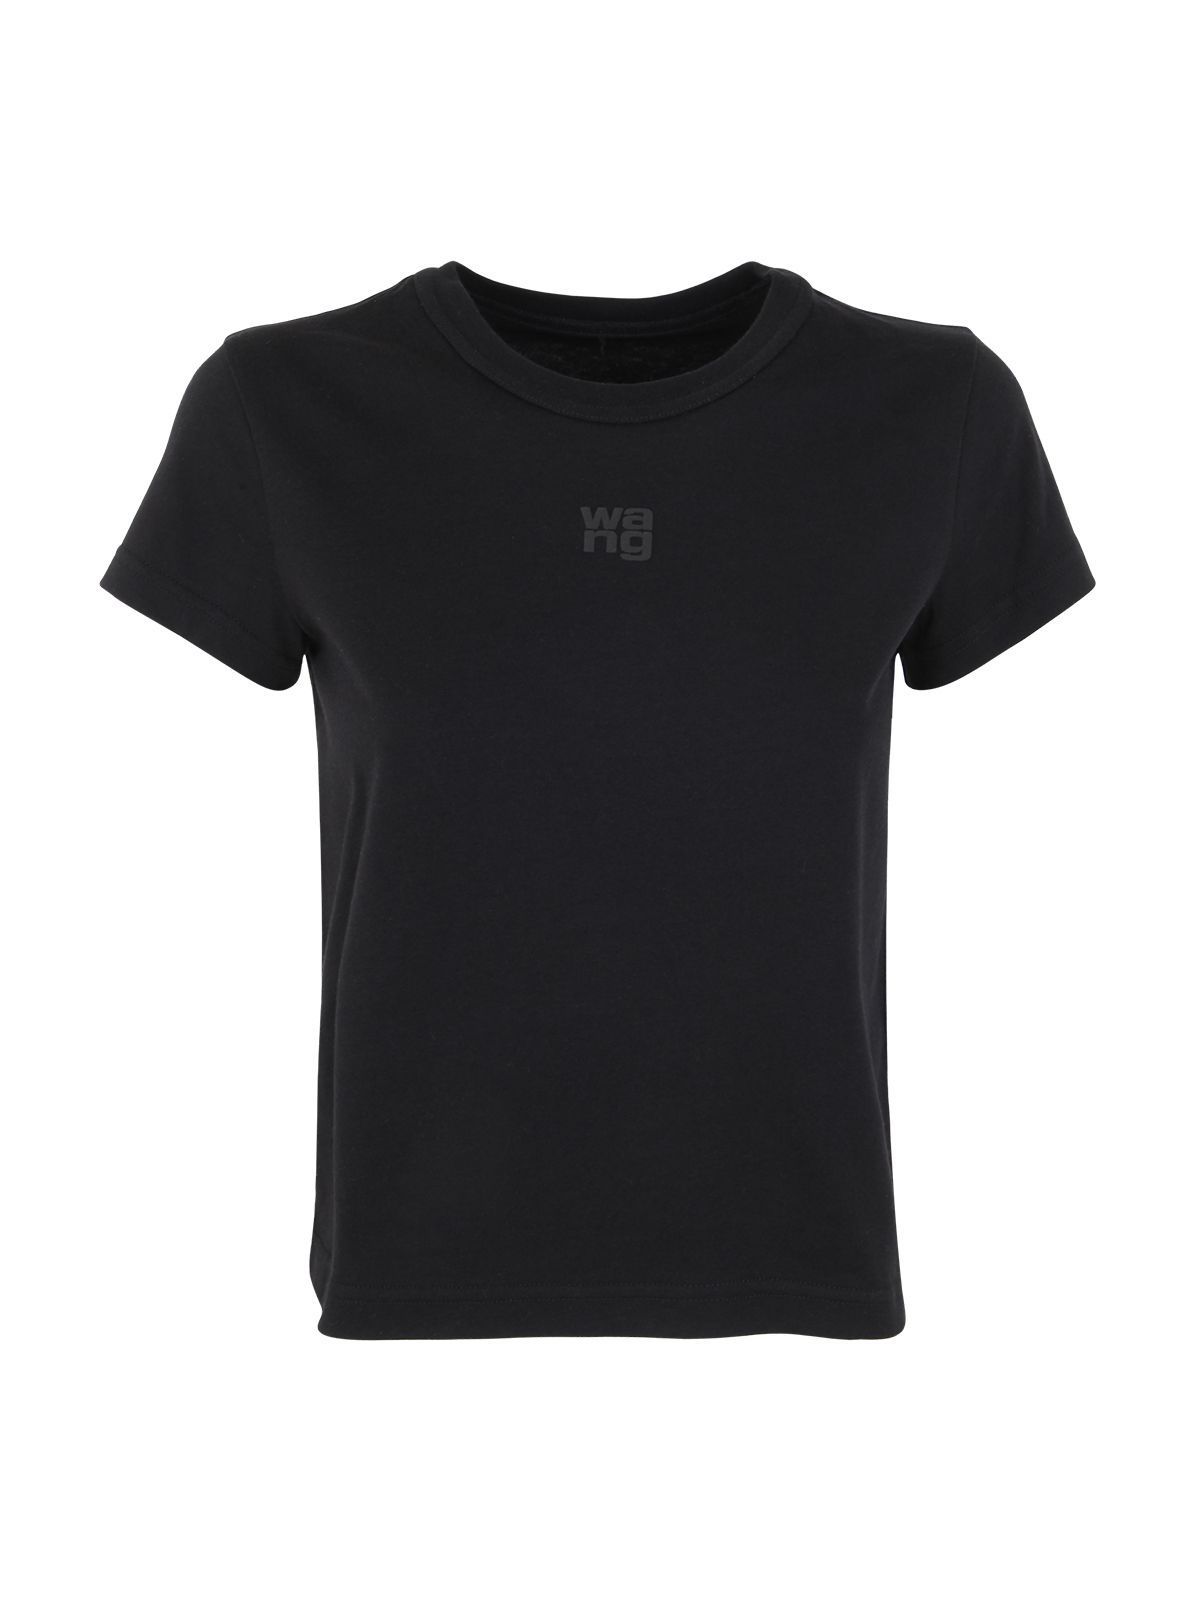 ALEXANDER WANG ESSENTIAL SHRUNK TEE WITH PUFF LOGO AND BOUND NECK,4CC3221358.C|092